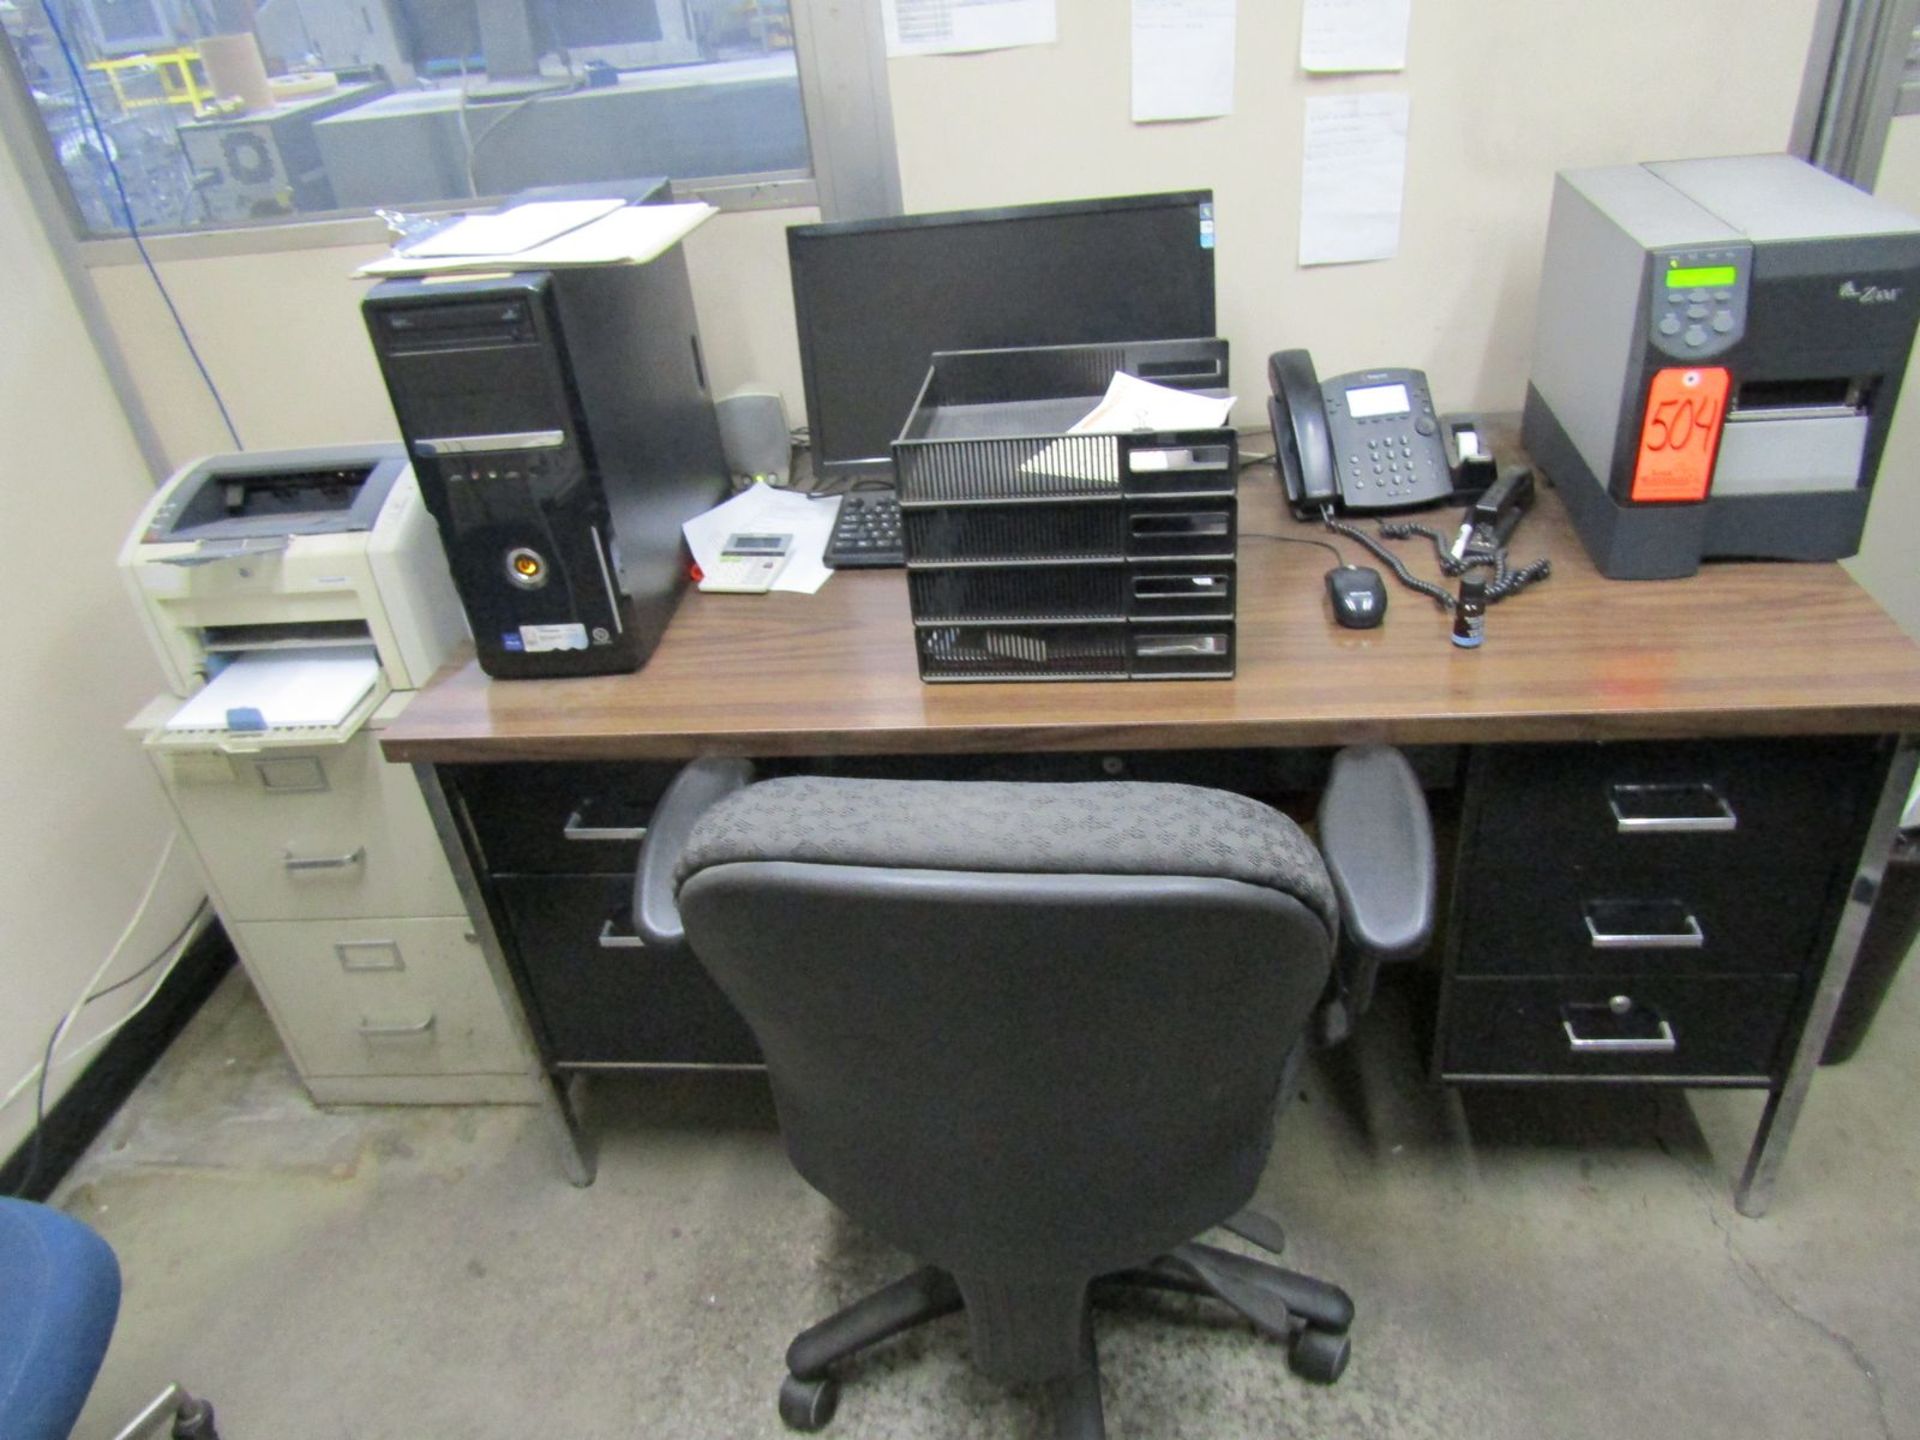 Lot - Shipping Office Furniture, to Include: (2) Desks, (3) Chairs, & (1) Adjustable Shelving Unit - Image 2 of 2